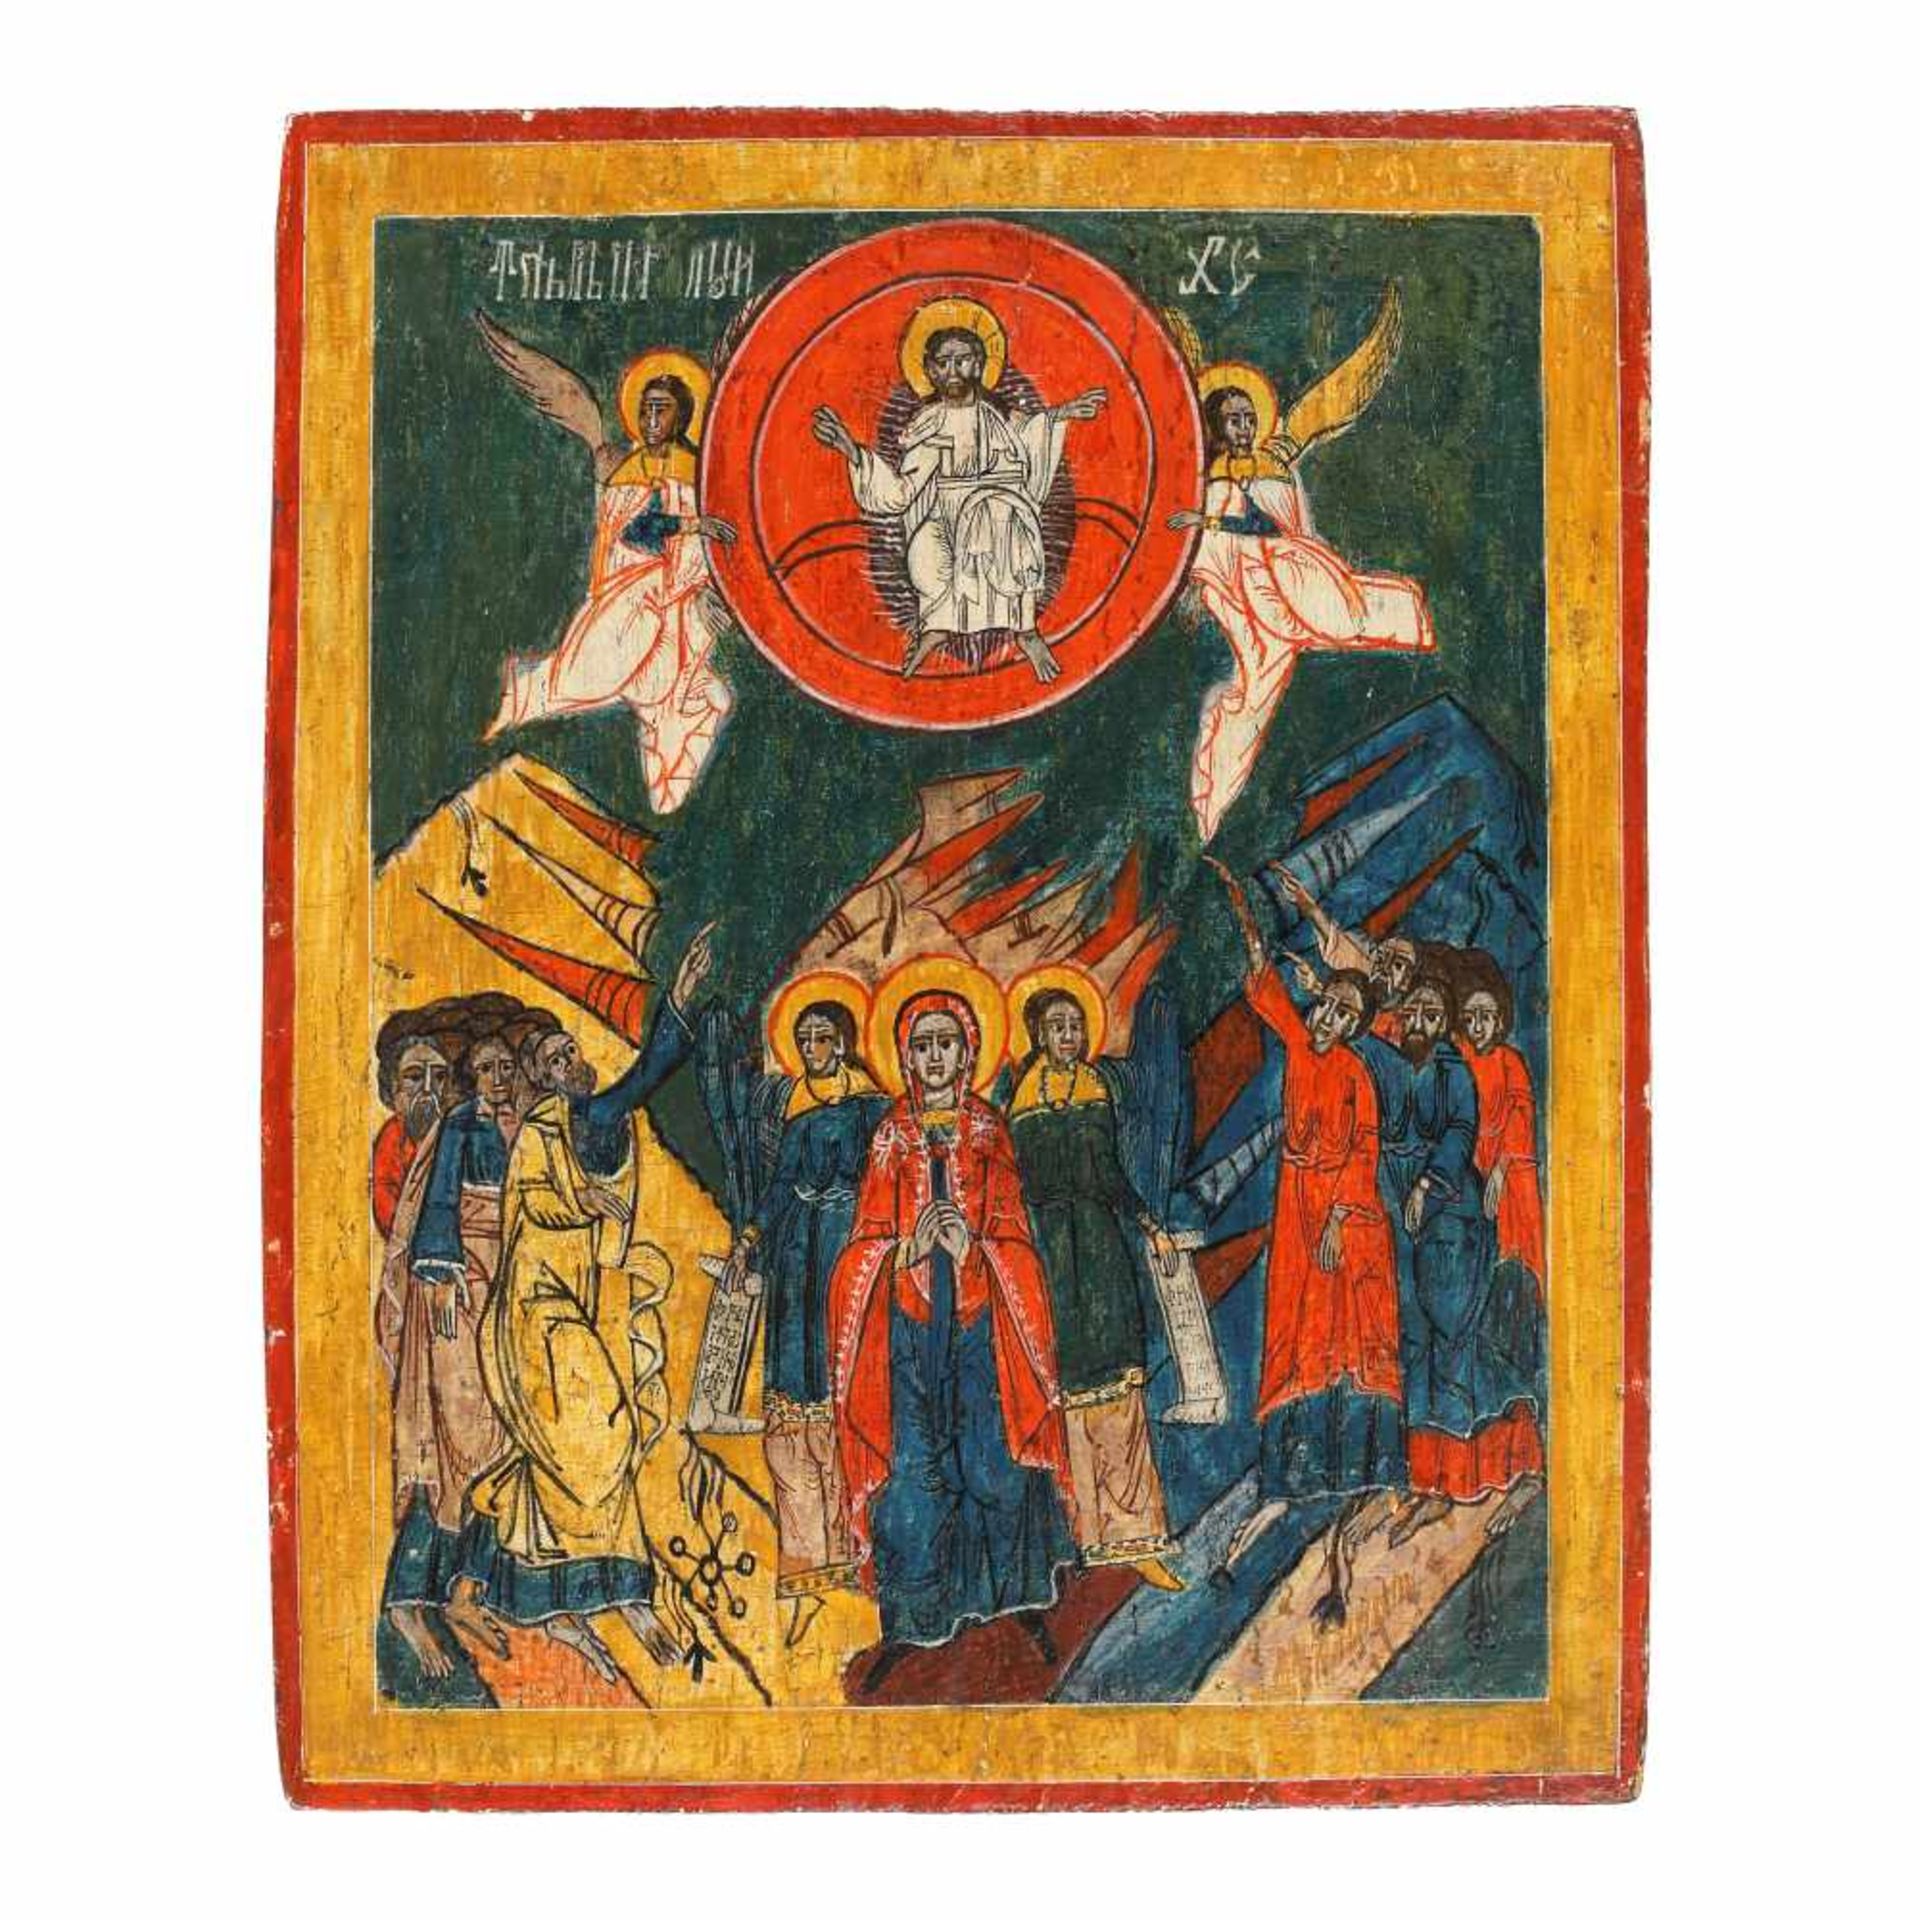 ”The Ascension of Jesus”, Romanian school, Wallachia, late 18th century - early 19th century